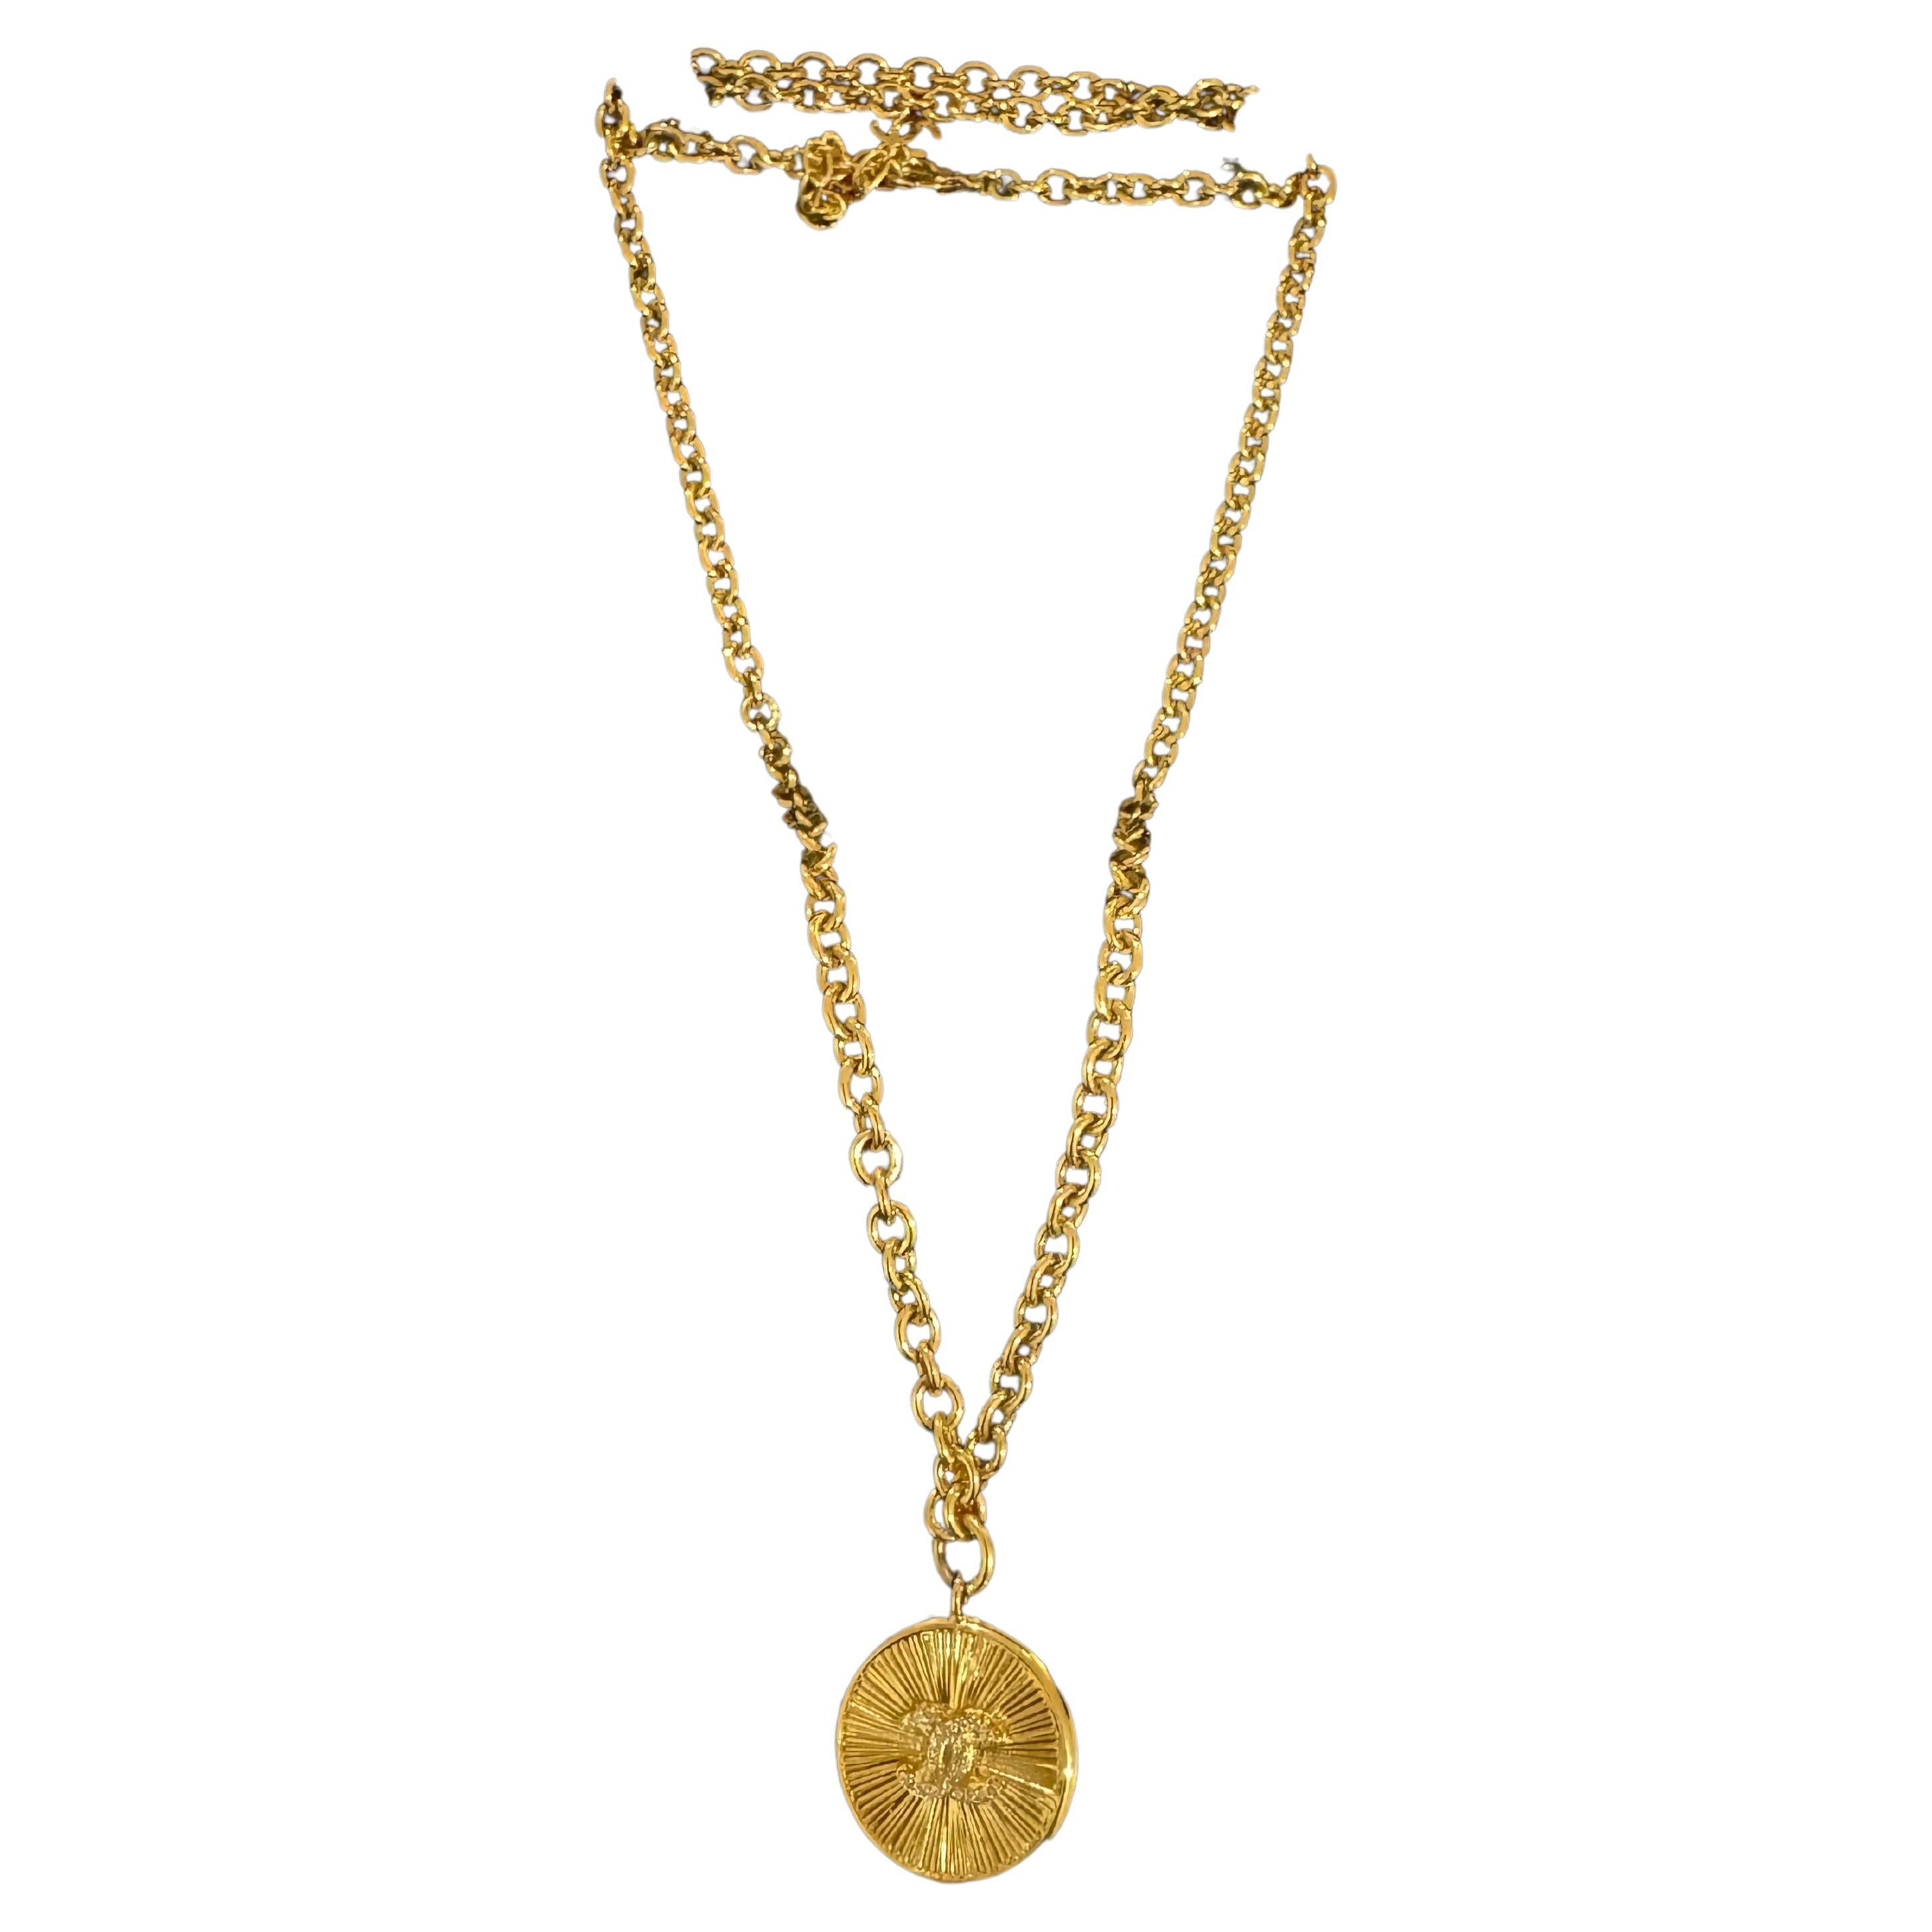 Chanel long medallion necklace gold with chanel cc logo For Sale